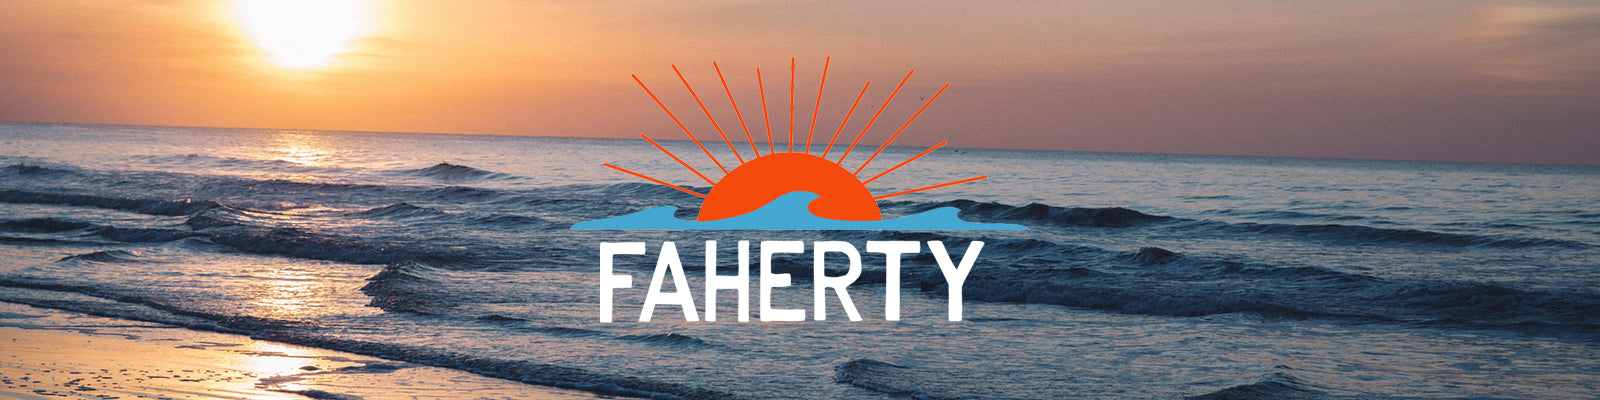 Faherty Featured | STAG